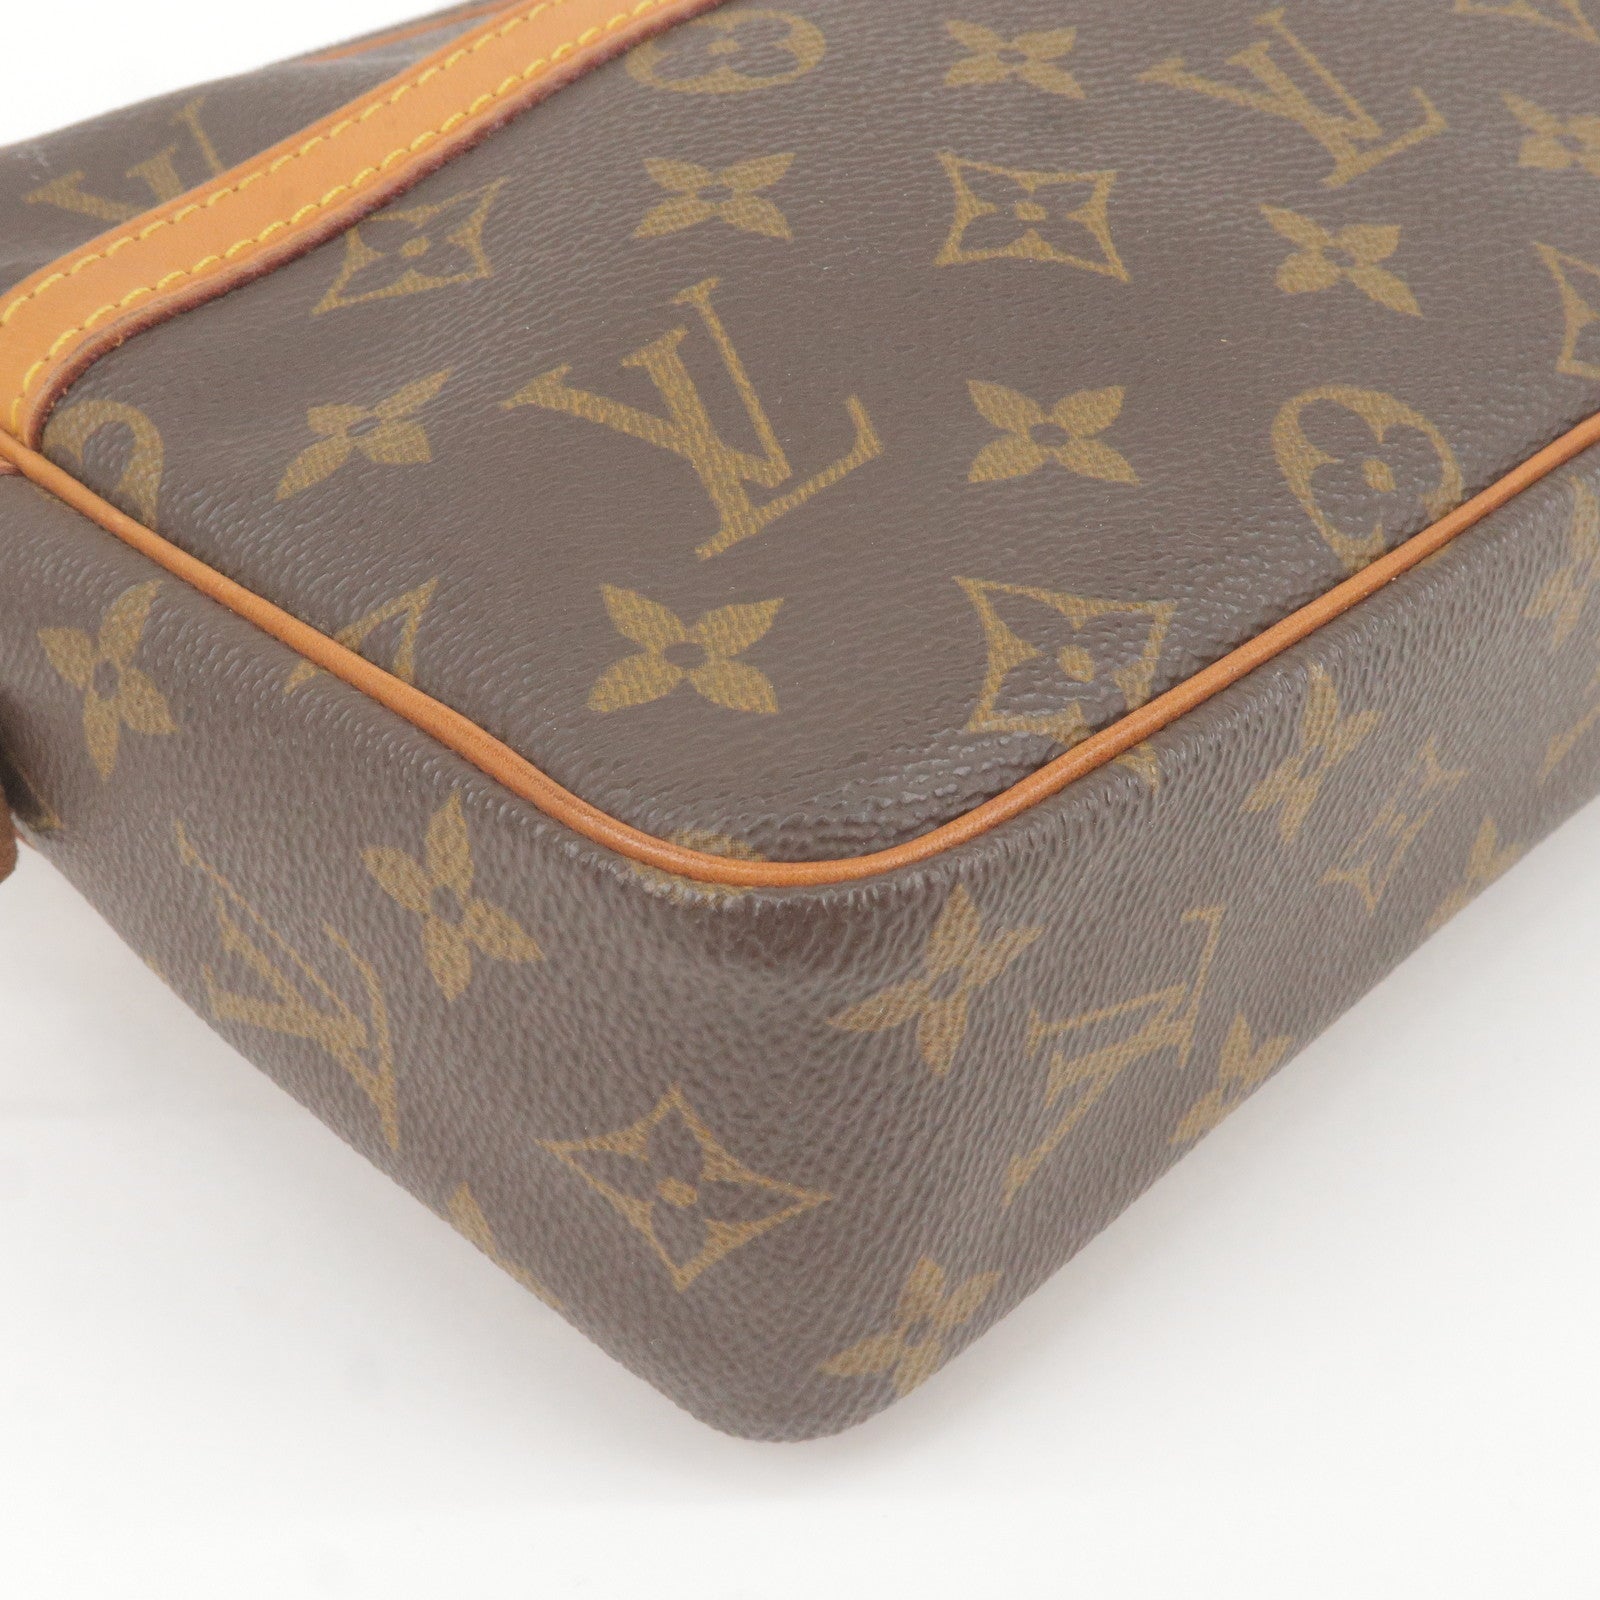 Louis Vuitton Keepall Bandouliere Bag Limited Edition Since 1854